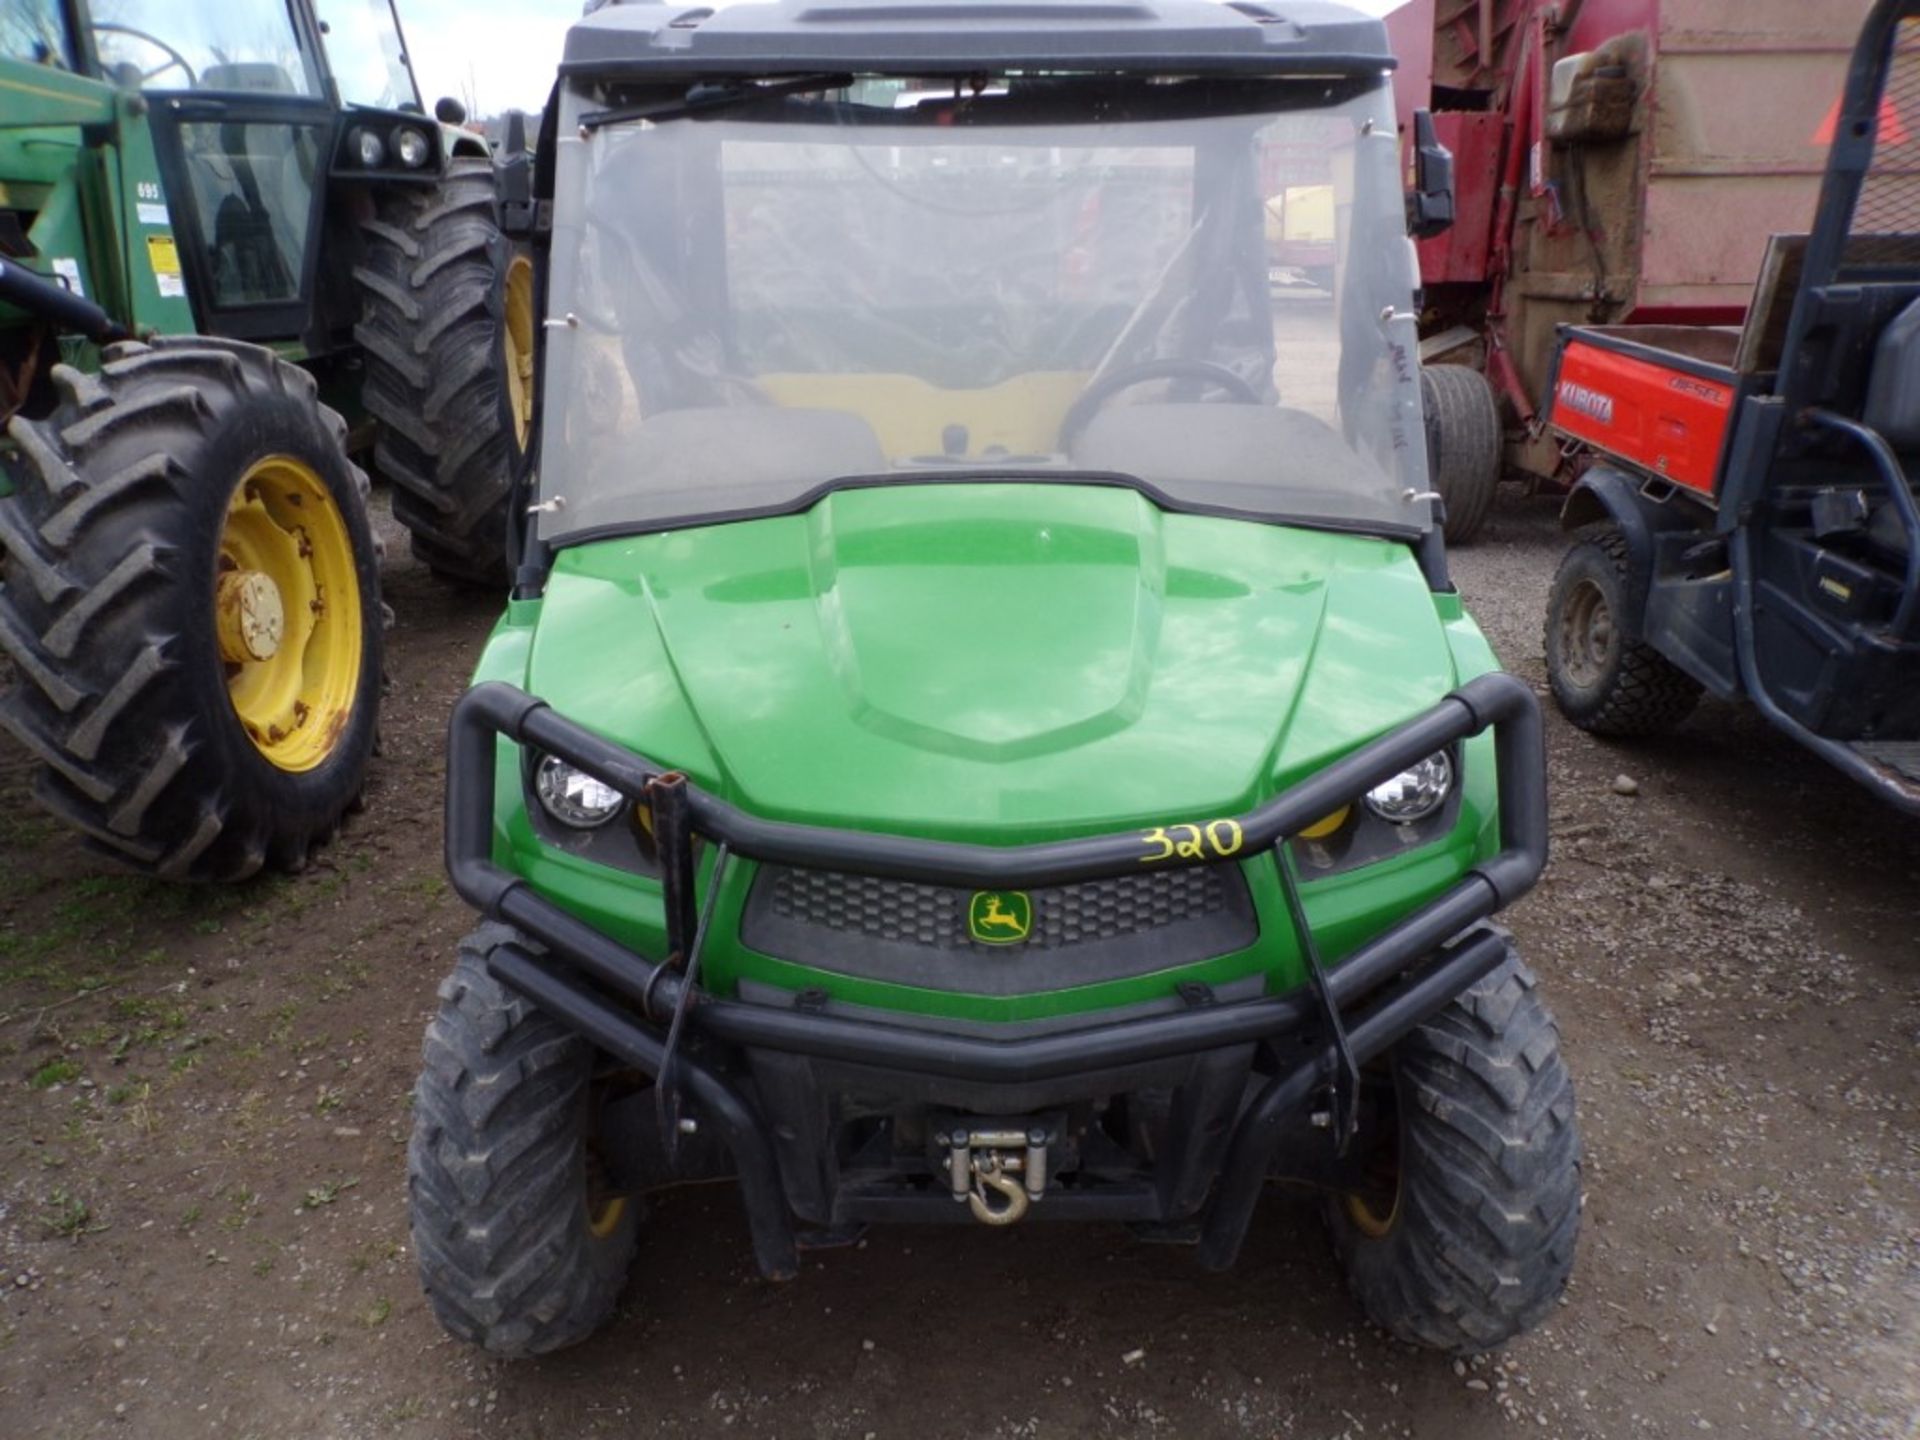 John Deere XUV-550 UTV with Canopy and Windshield, 4 WD, 395 Hrs., Super Nice, Ser.# 004802 (4365) - Image 2 of 6